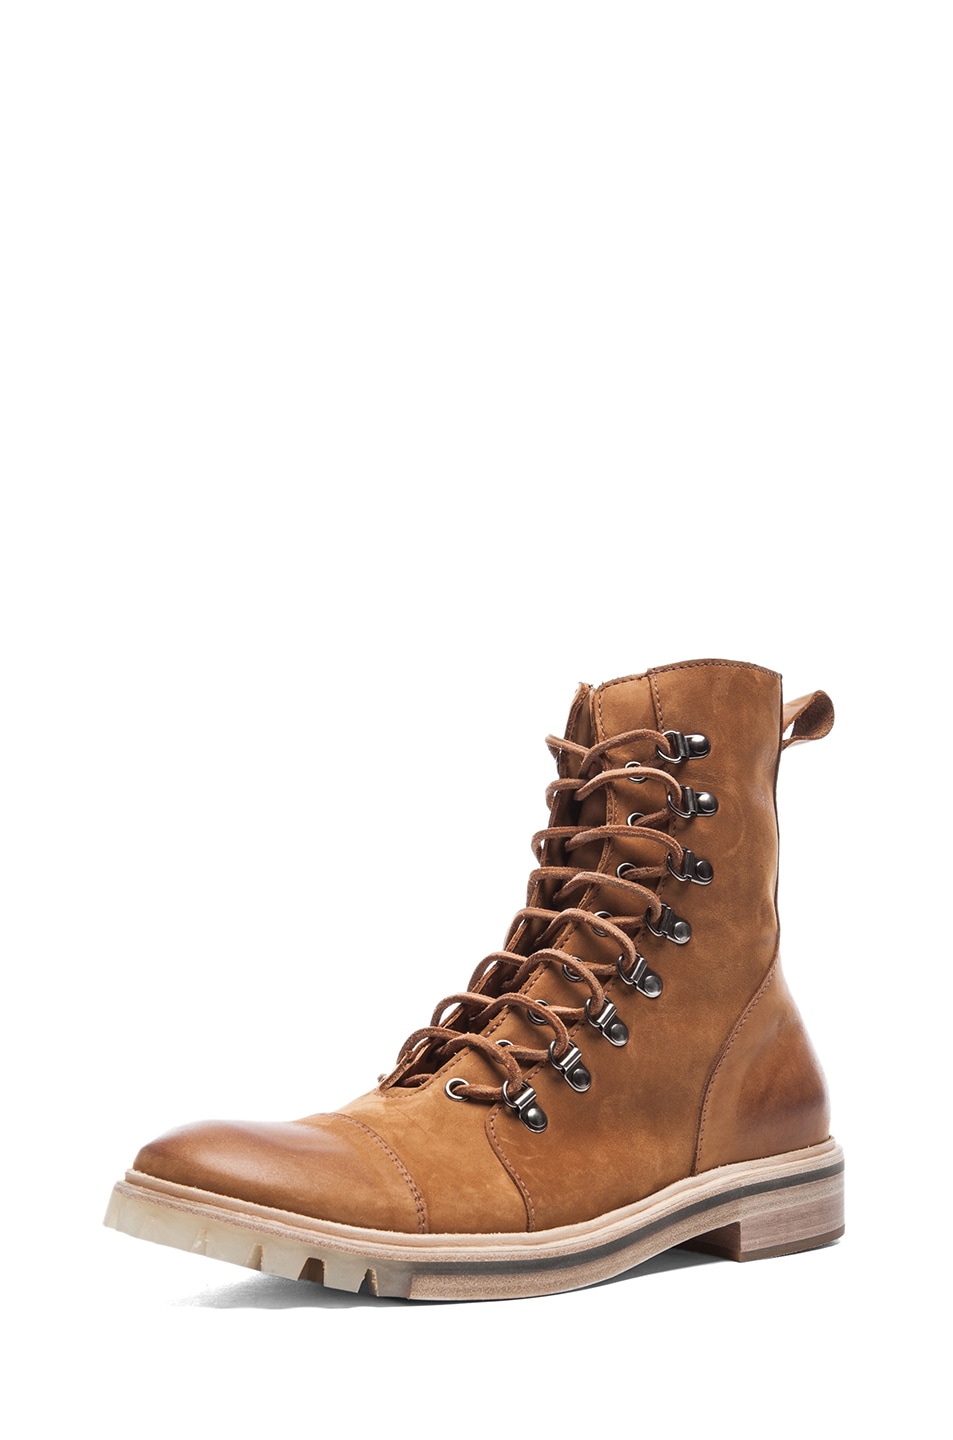 Image 1 of Maison Margiela Suede Lace Up Boots in Honey